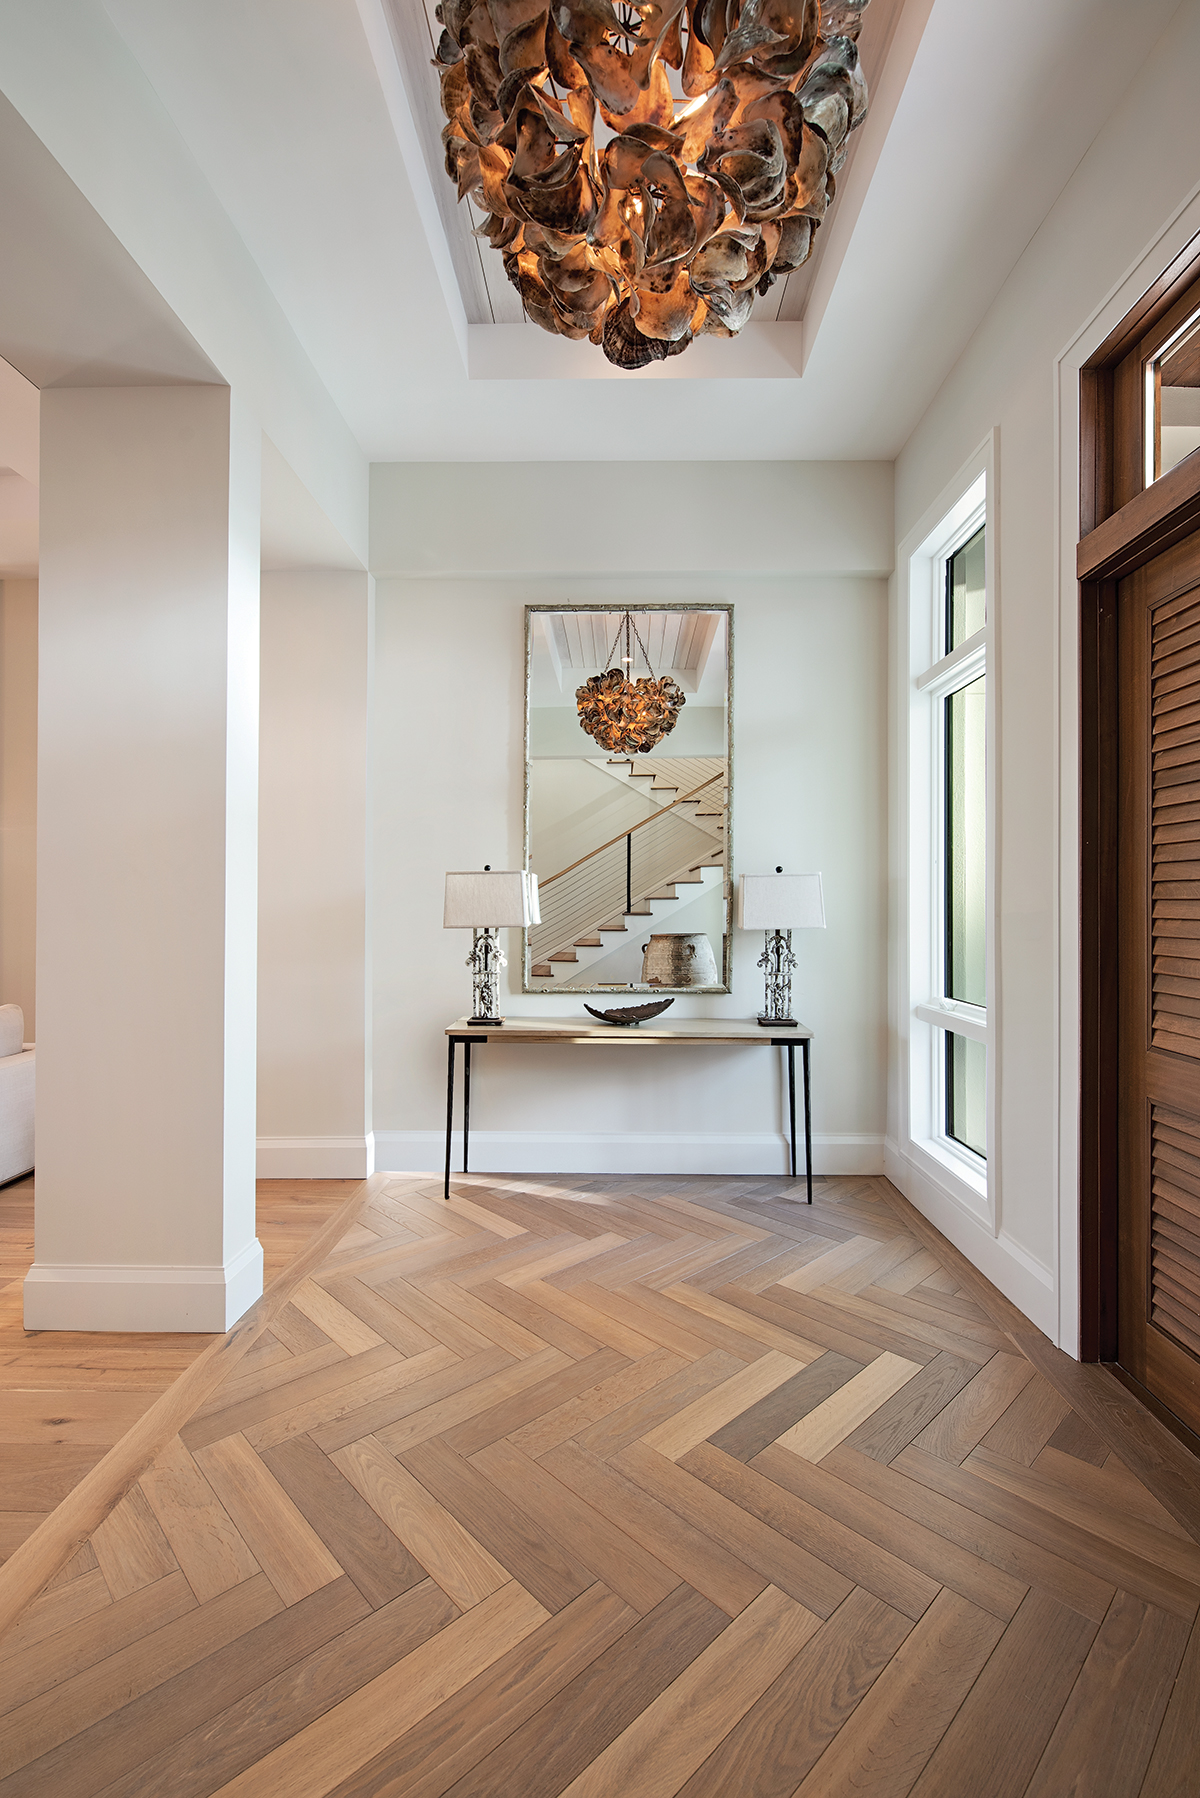 In the foyer, the “Venus” chandelier, a true one-of-a-kind work of art comprised of saddle oyster shells, captivates from above. Legone Bastone’s Giuseppina wood planks from Naples Flooring grounds the entry space in a handsome herringbone pattern.